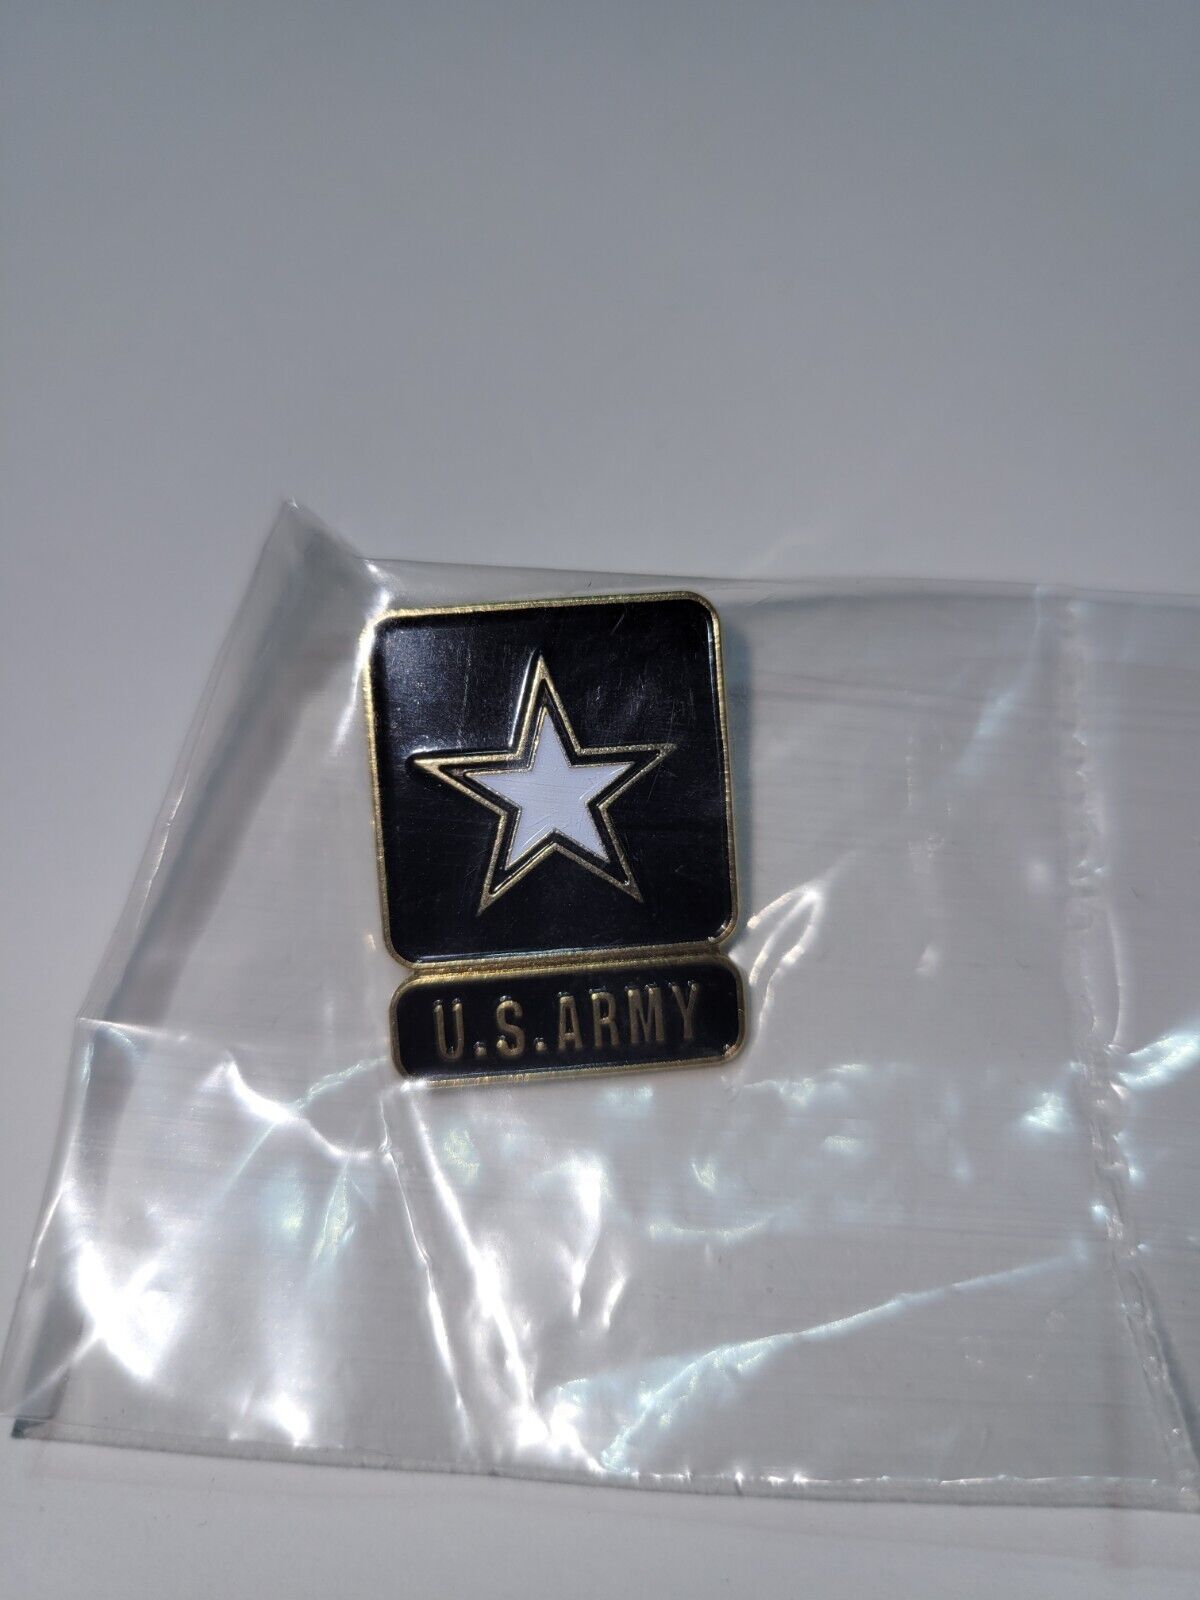 US ARMY Lapel Pin Black White Gold Star Veteran Hat Tie Pin Army of One